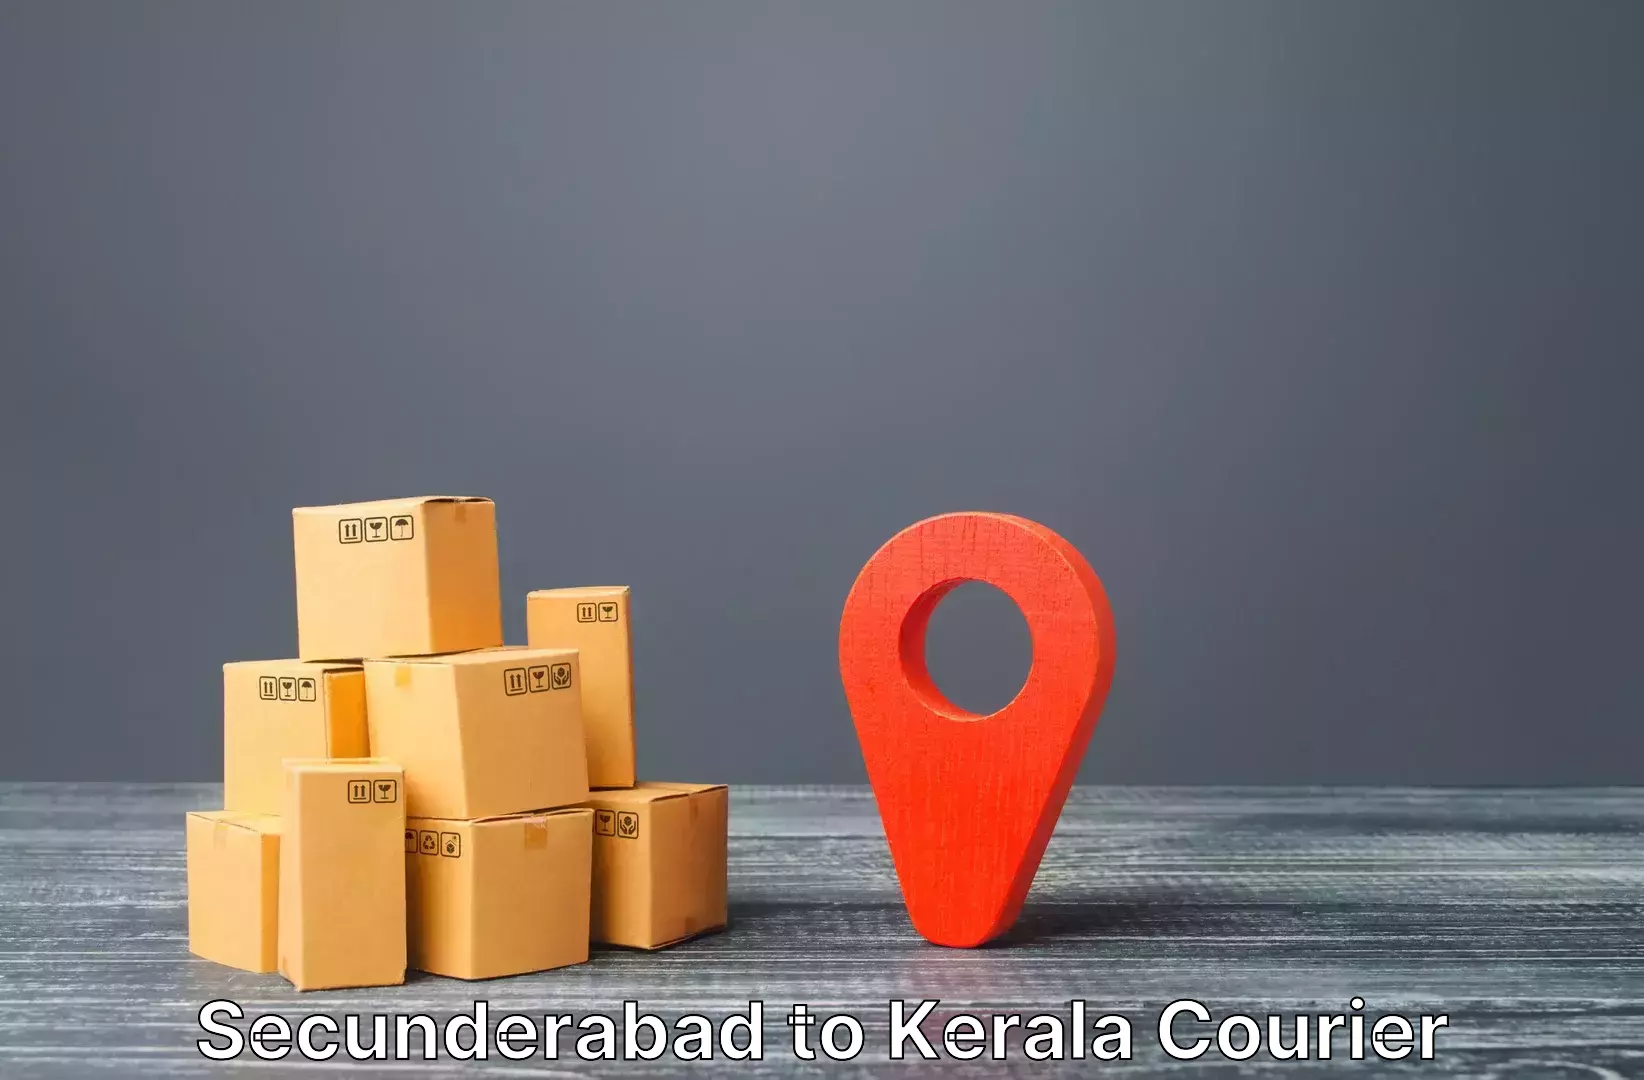 Online luggage shipping booking Secunderabad to Cochin Port Kochi